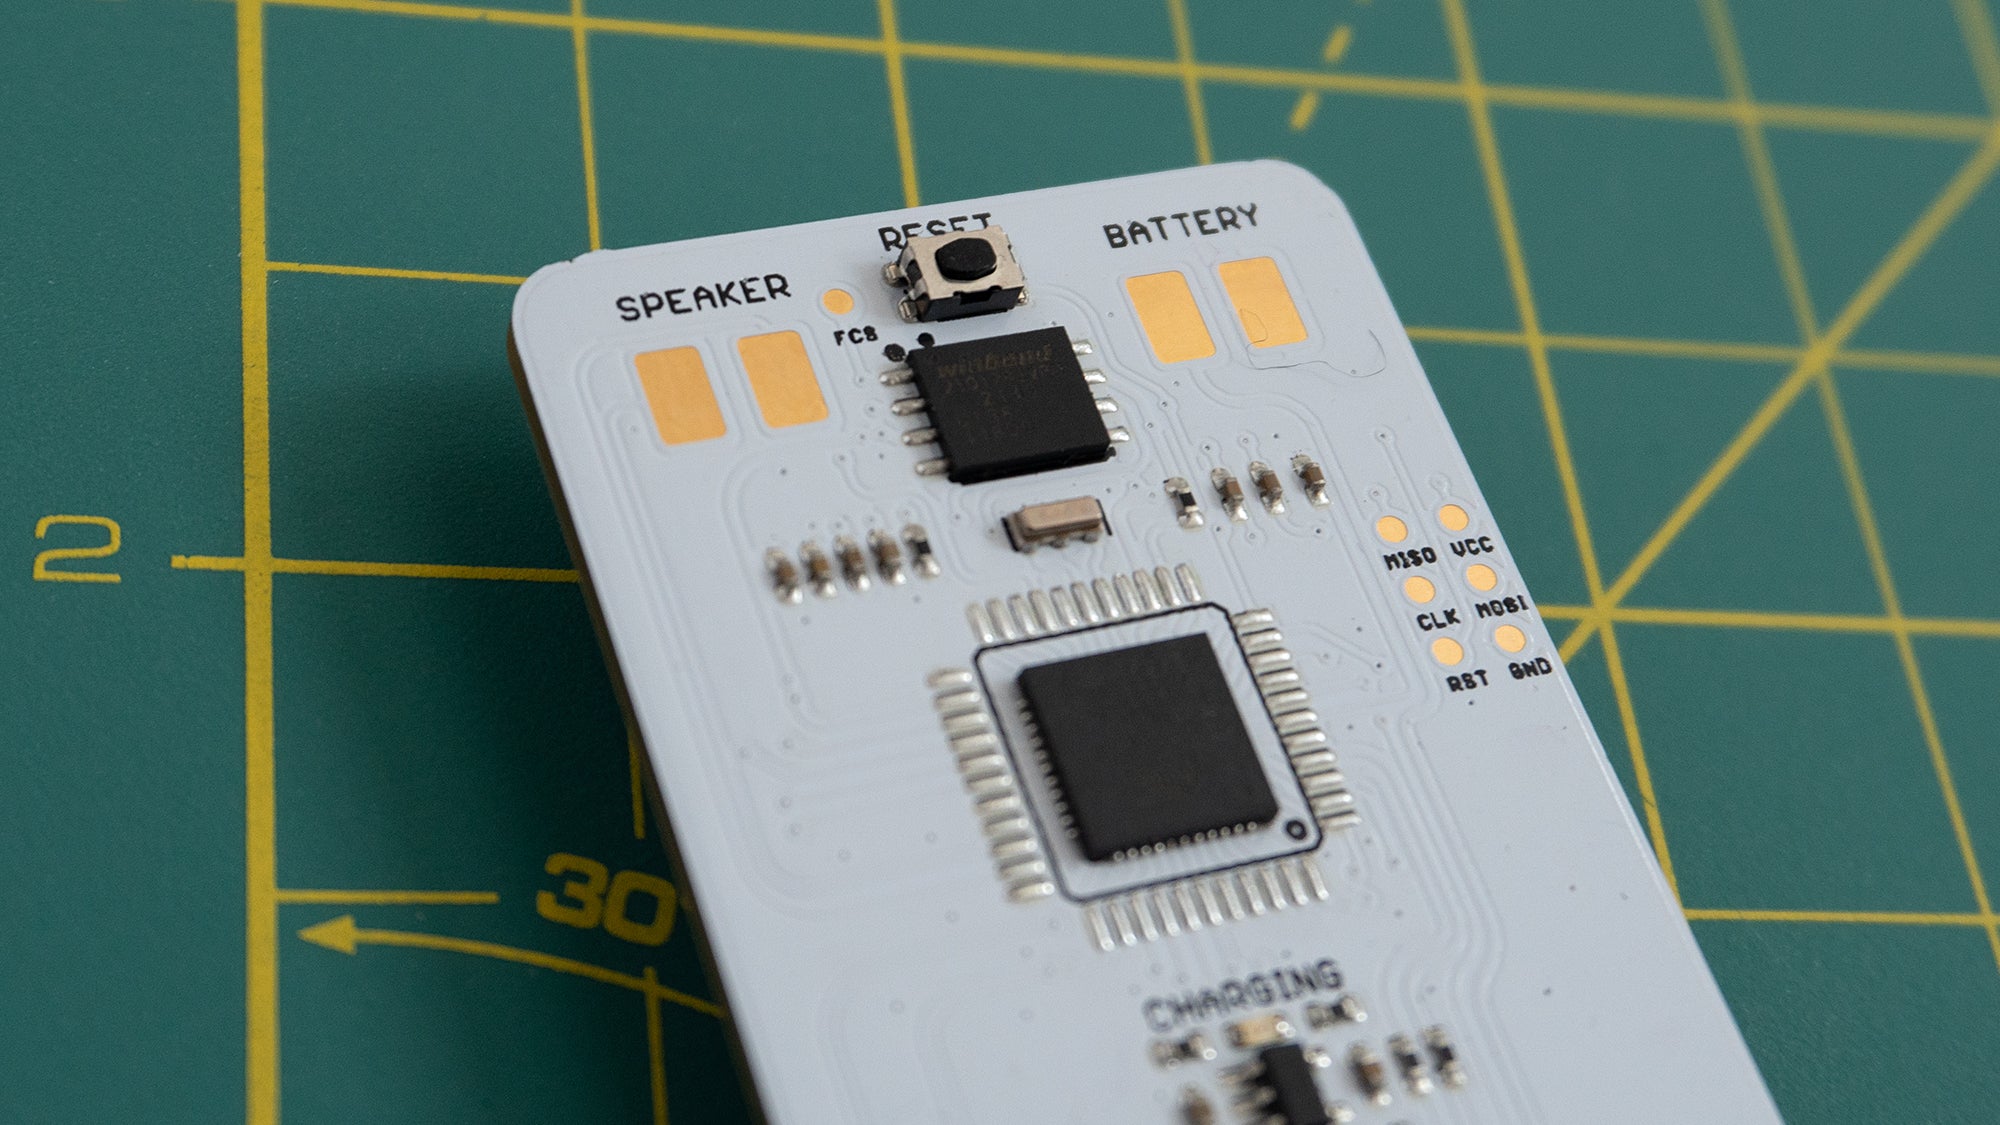 The back of the Arduboy Mini features exposed contacts for attached a rechargeable battery and a speaker. (Photo: Andrew Liszewski | Gizmodo)